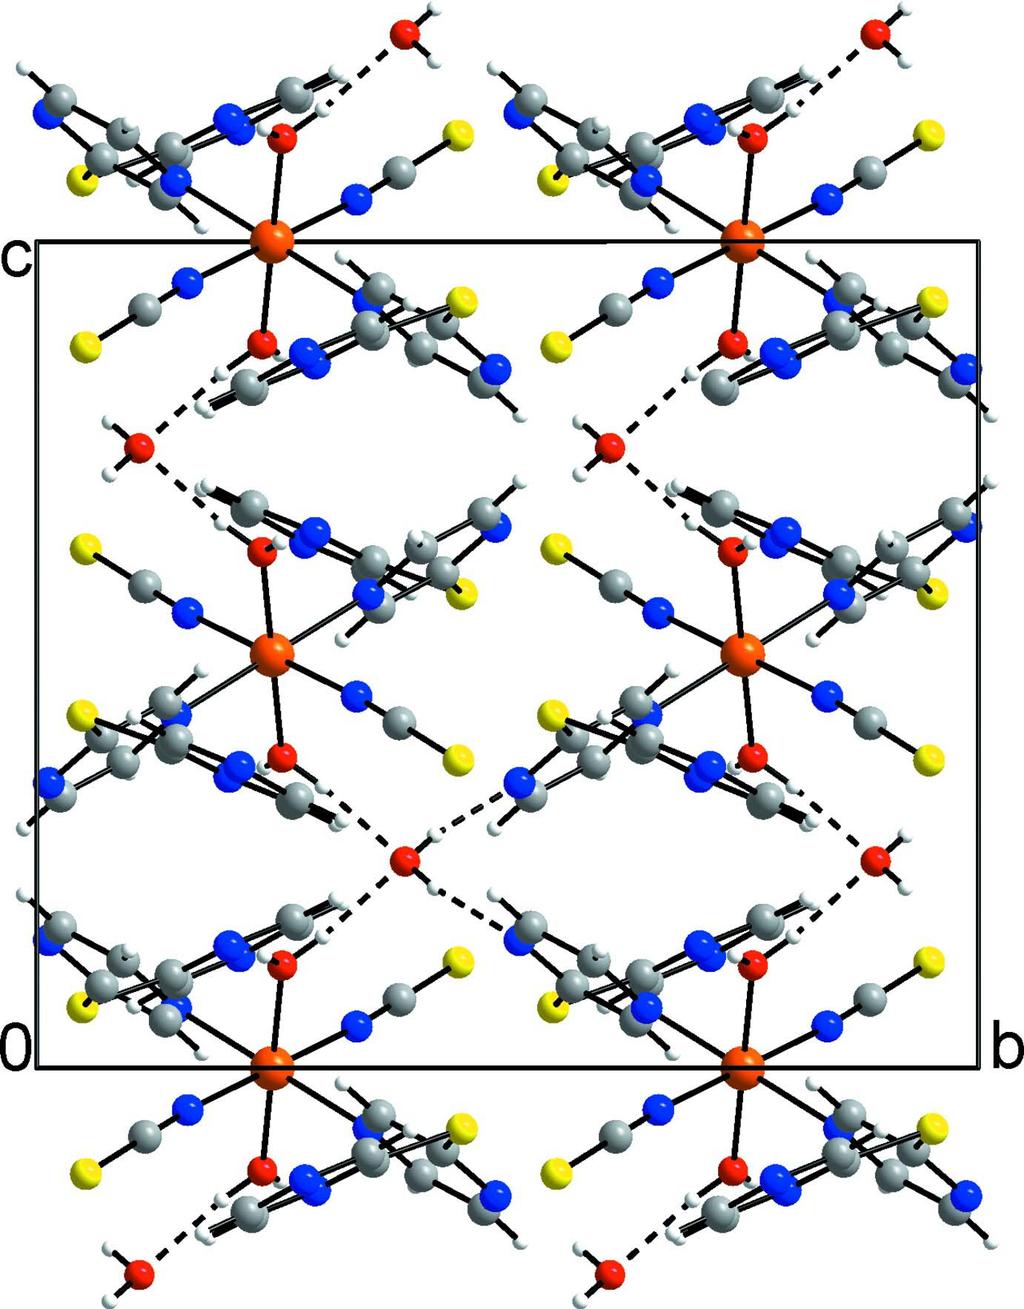 Figure 2 Crystal structure of the title compound with view along the a-axis (orange = iron, blue = nitrogen, yellow = sulfur, red = oxygen, grey = carbon, white = hydrogen).